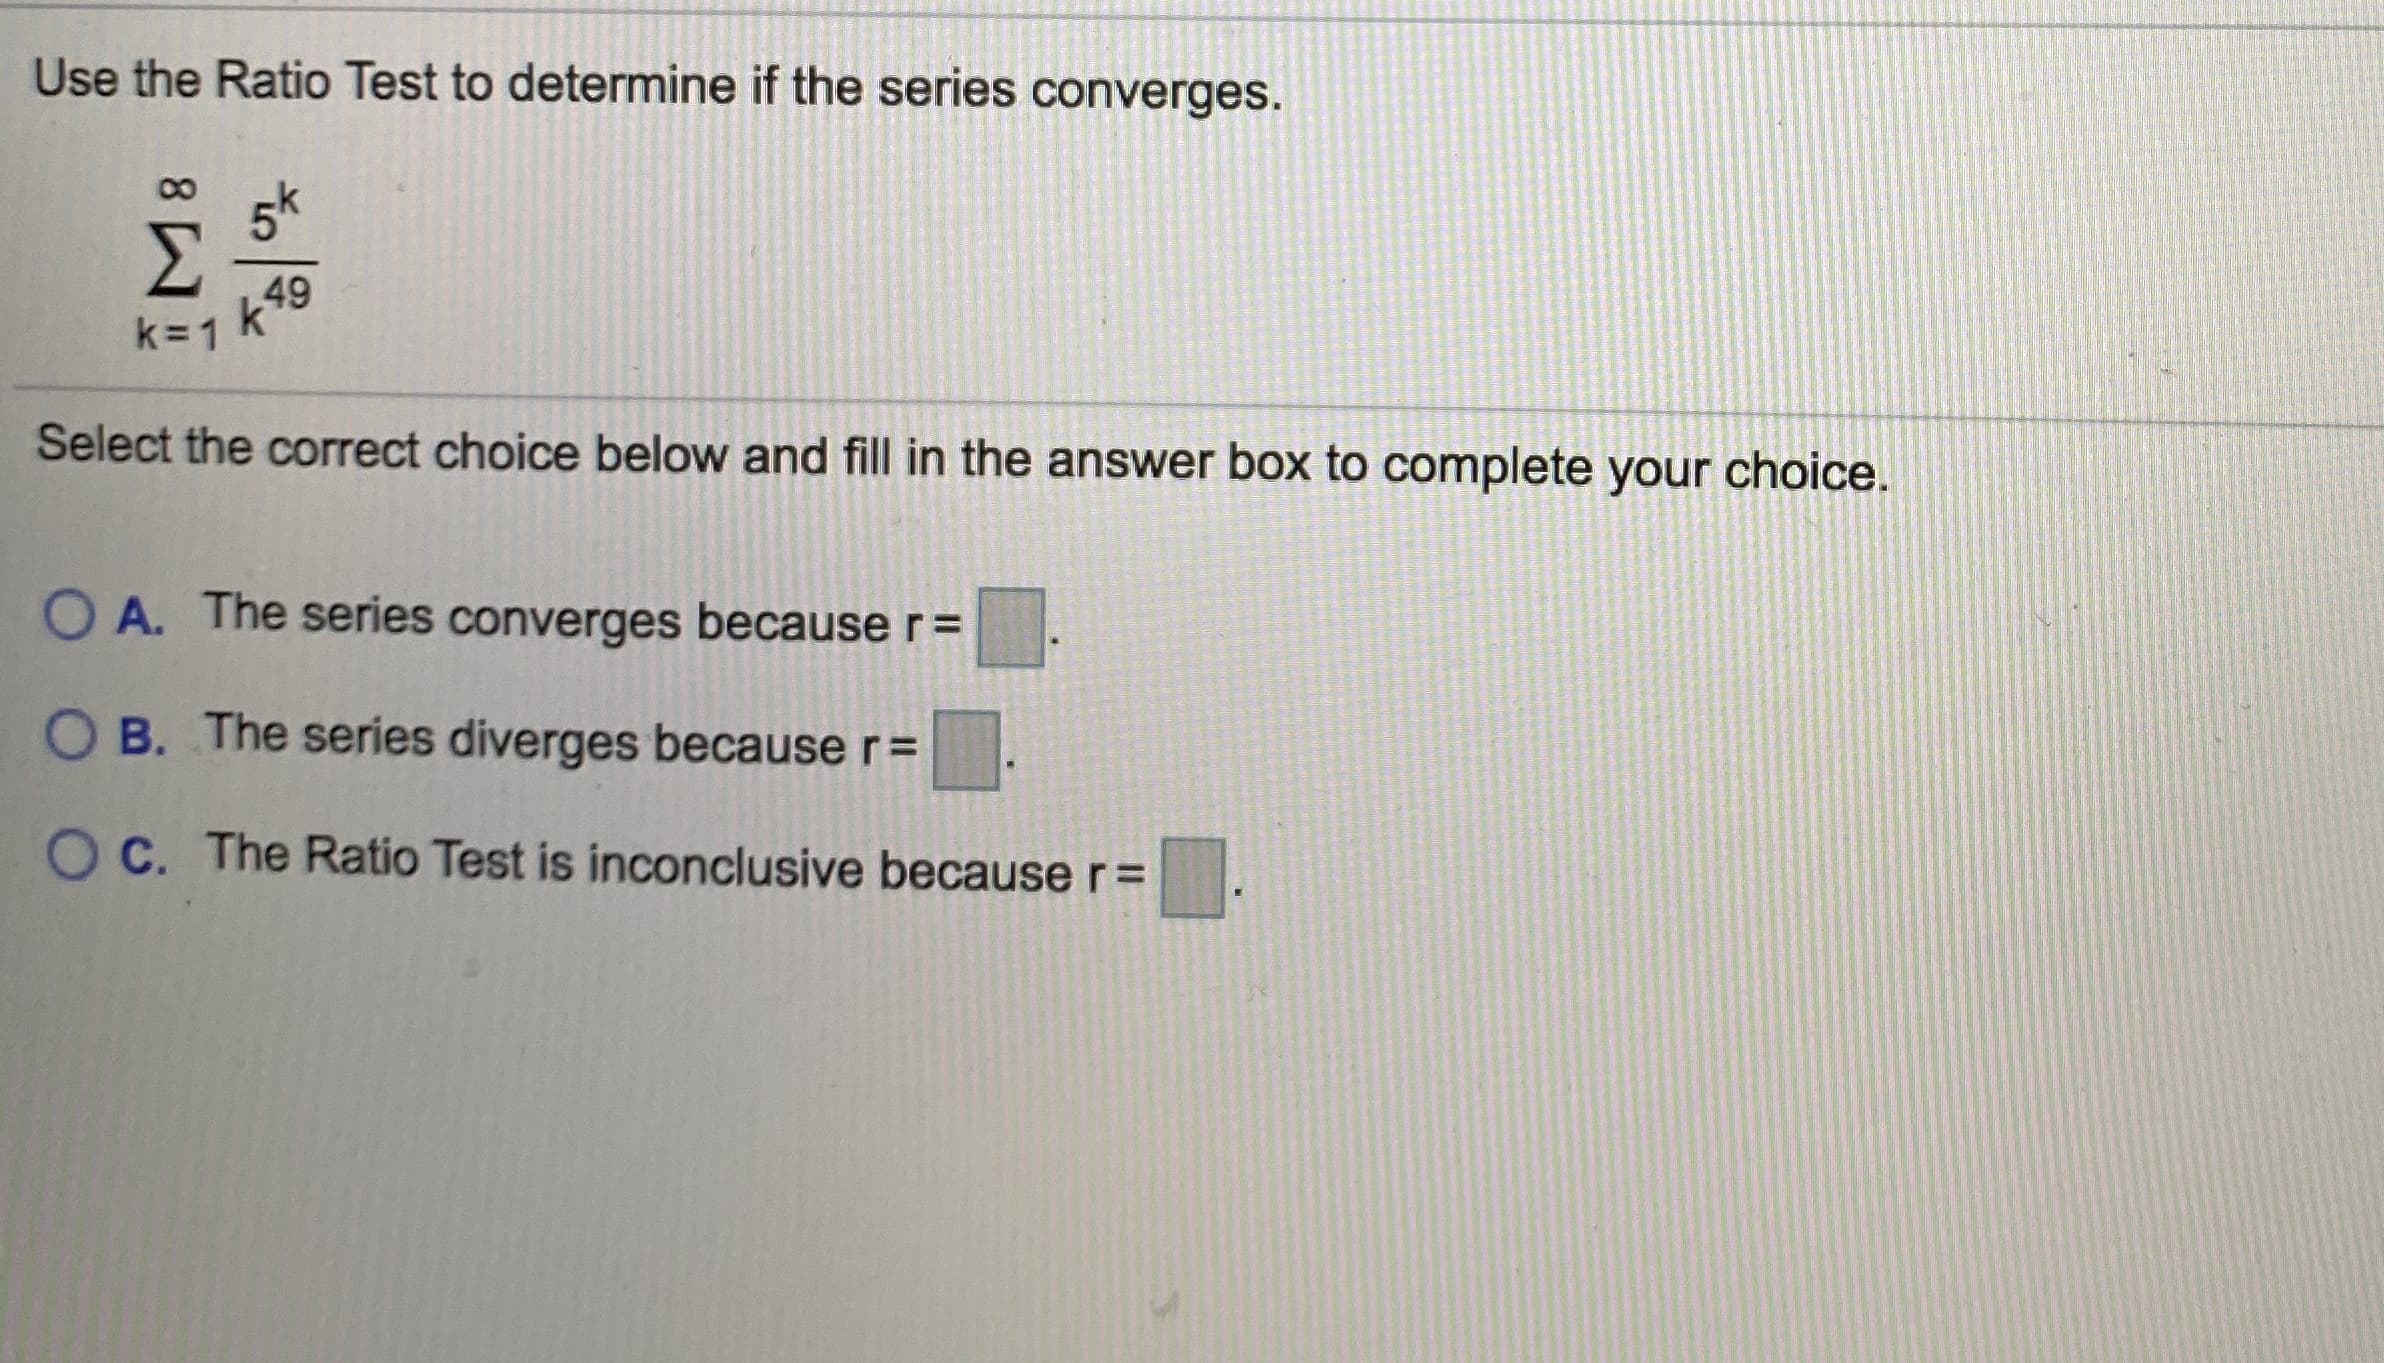 Use the Ratio Test to determine if the series converges.
5k
49
k=1 k
Select the correct choice below and fill in the answer box to complete your choice.
O A. The series converges because r=
O B. The series diverges because r=
O C. The Ratio Test is inconclusive because r=
